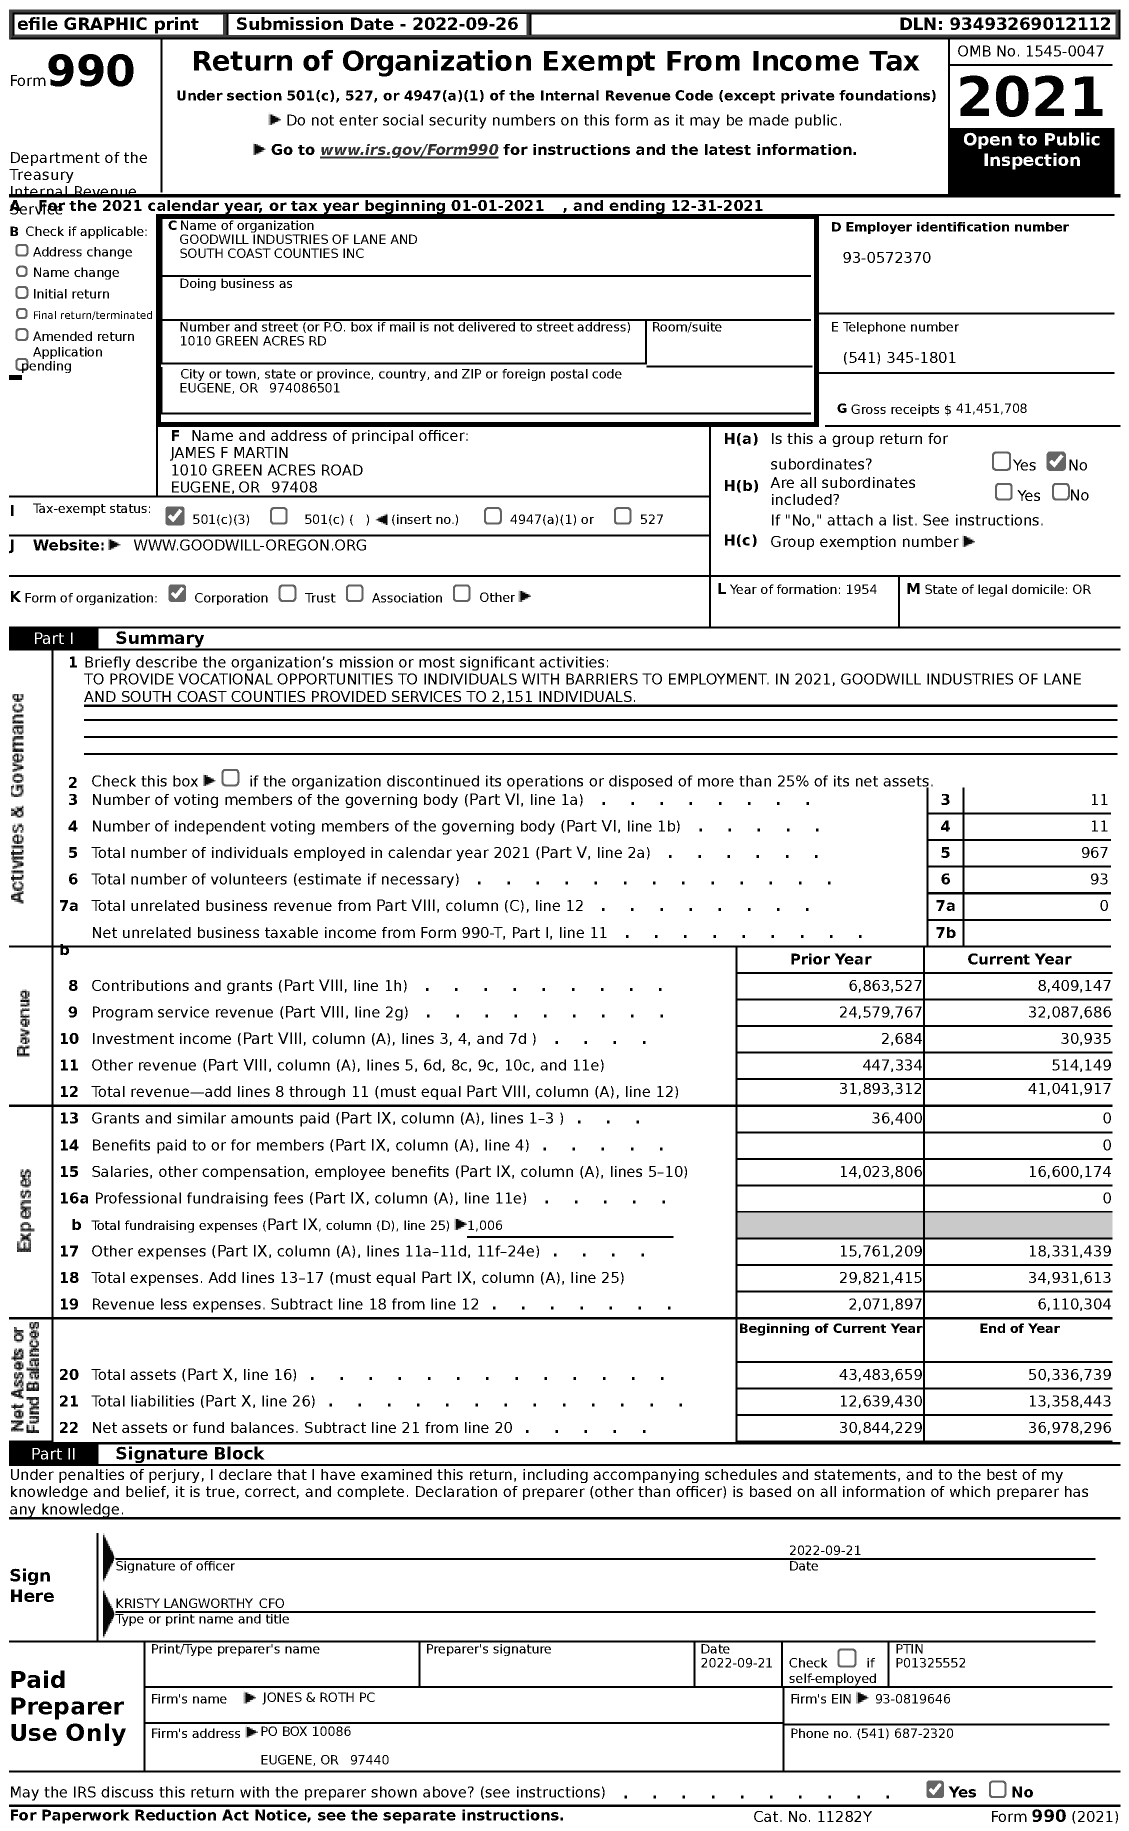 Image of first page of 2021 Form 990 for Goodwill Industries of Lane and South Coast Counties